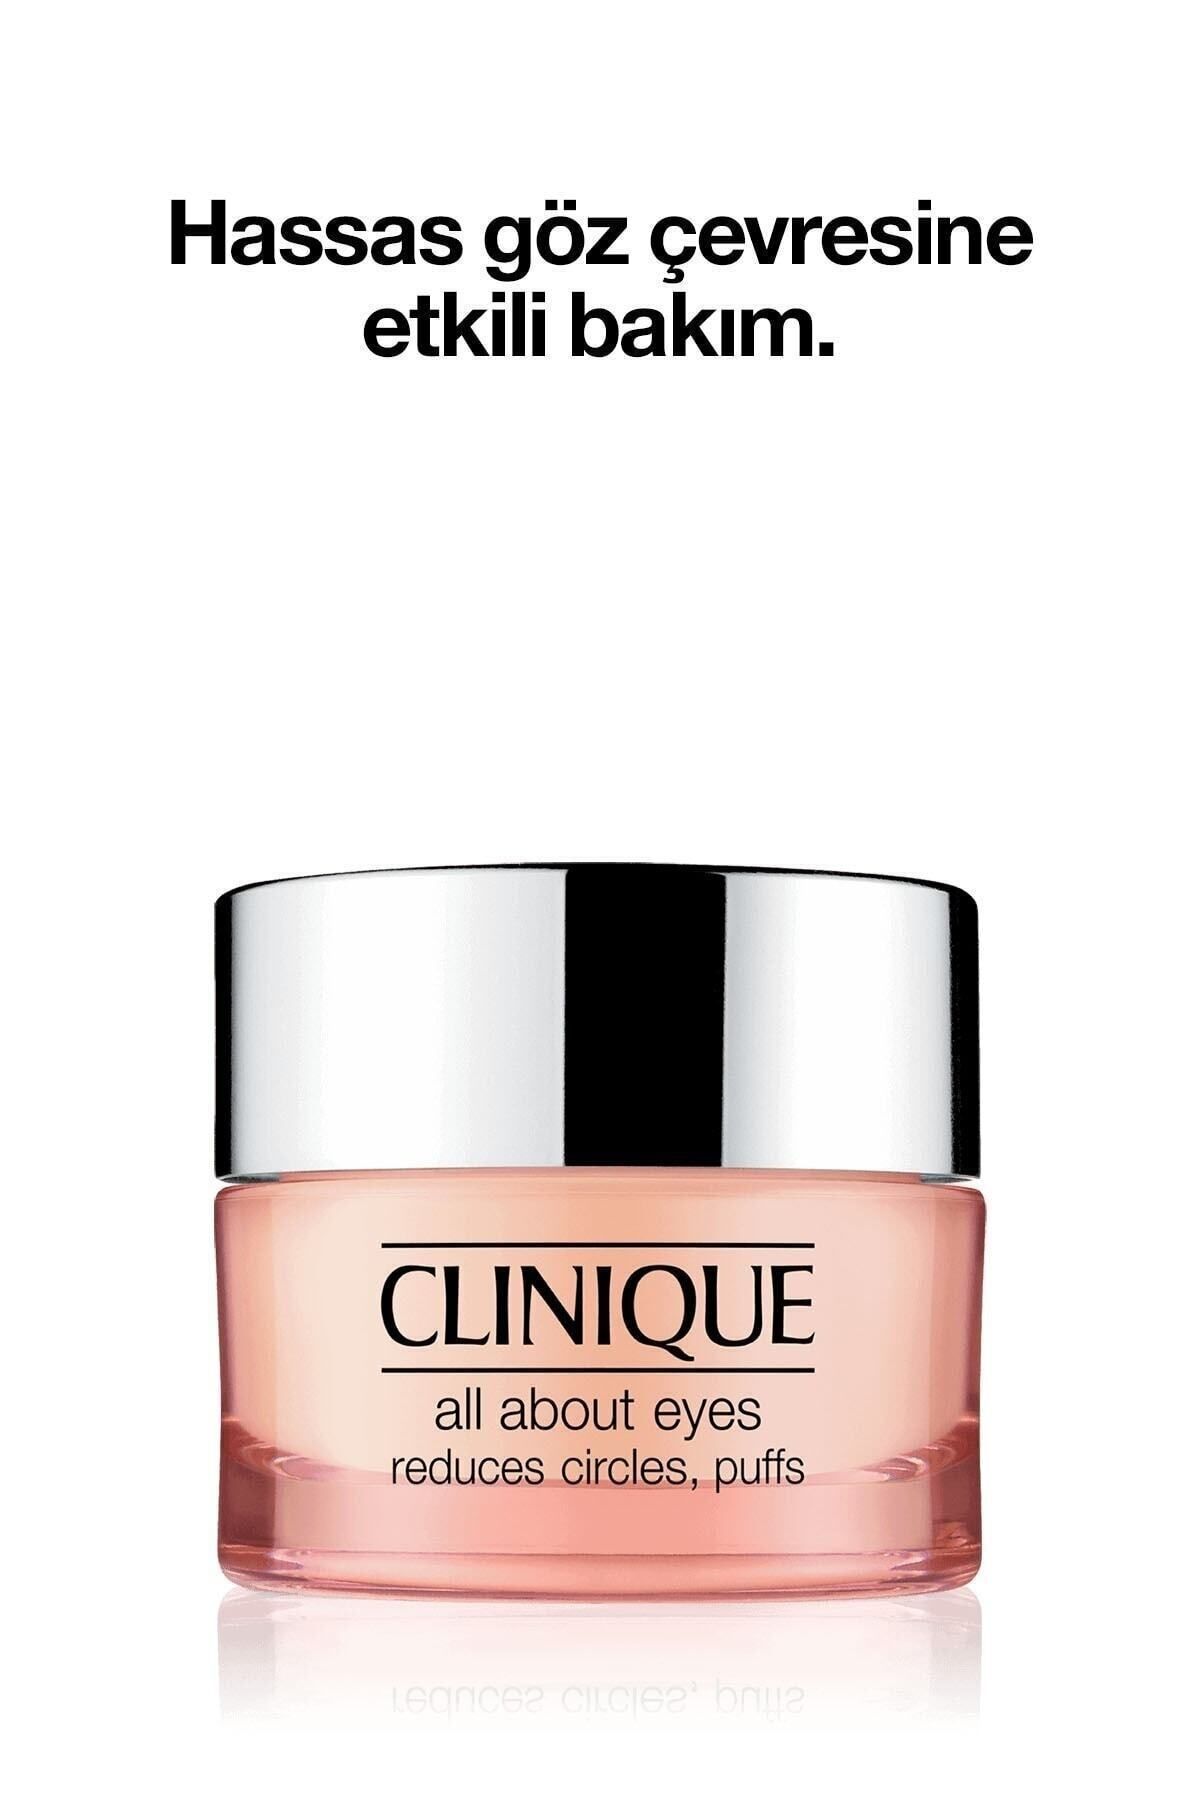 Clinique Smooth Under-Eye-Eye Contour Care Cream Reduces Fine Lines and Brightens Dark Circles 15 ml PSSN994